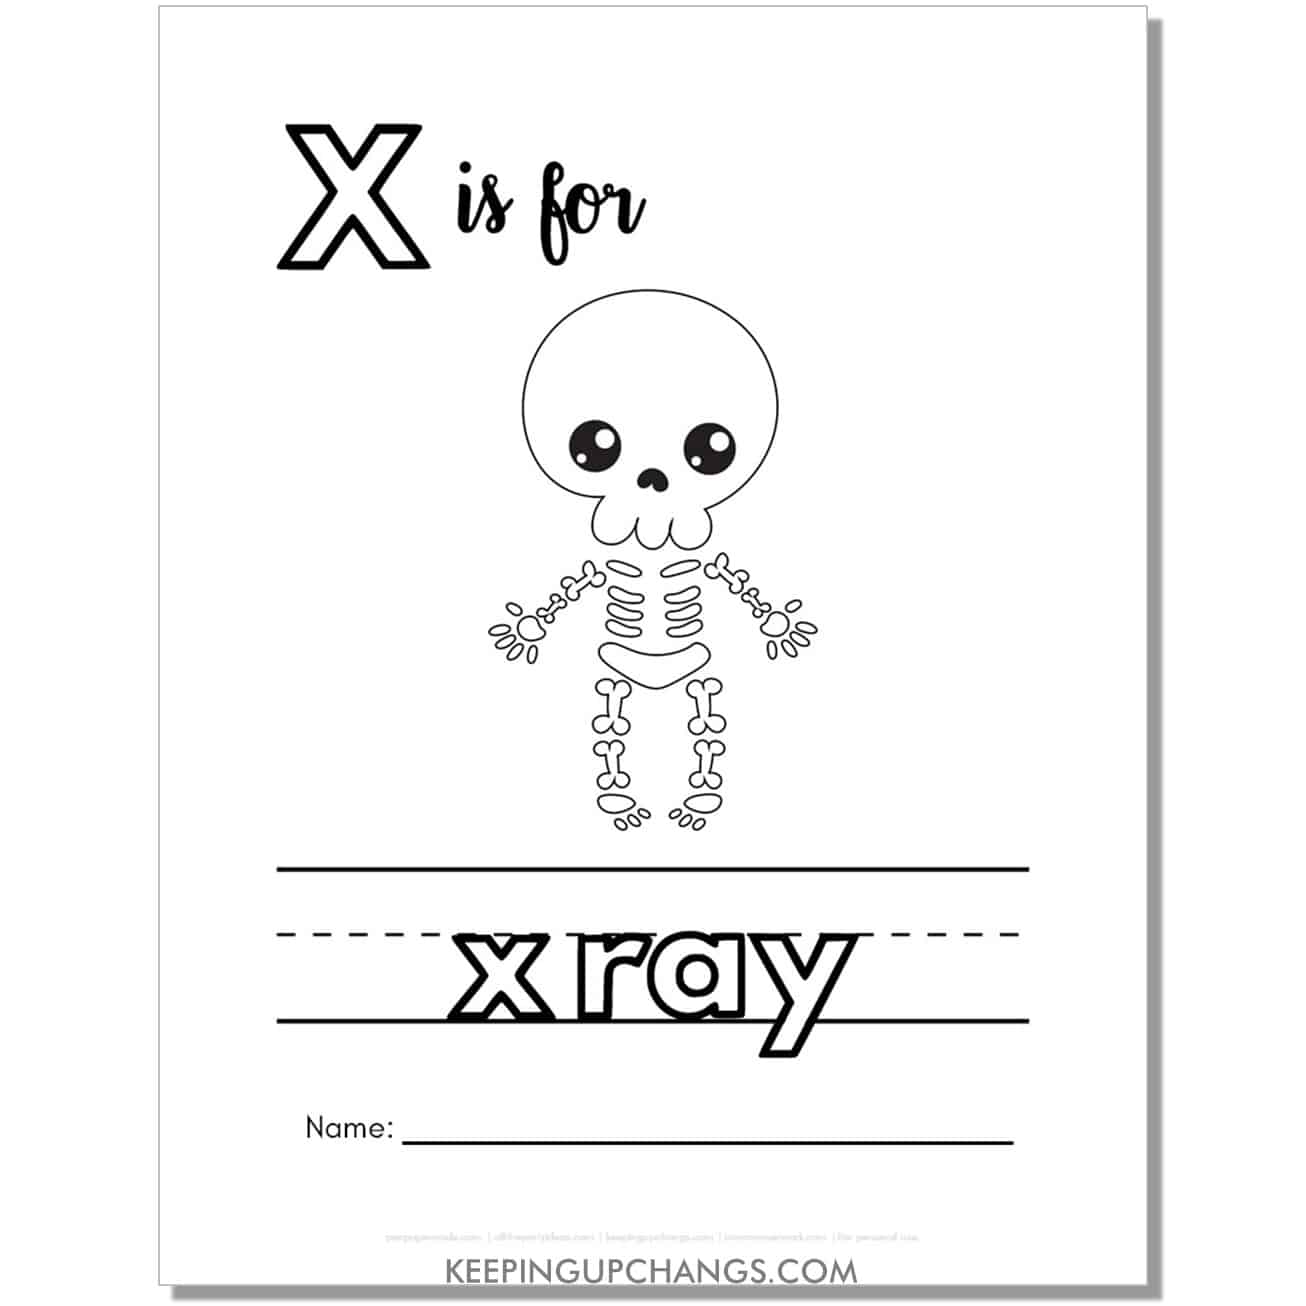 cute letter x coloring page worksheet with x ray.